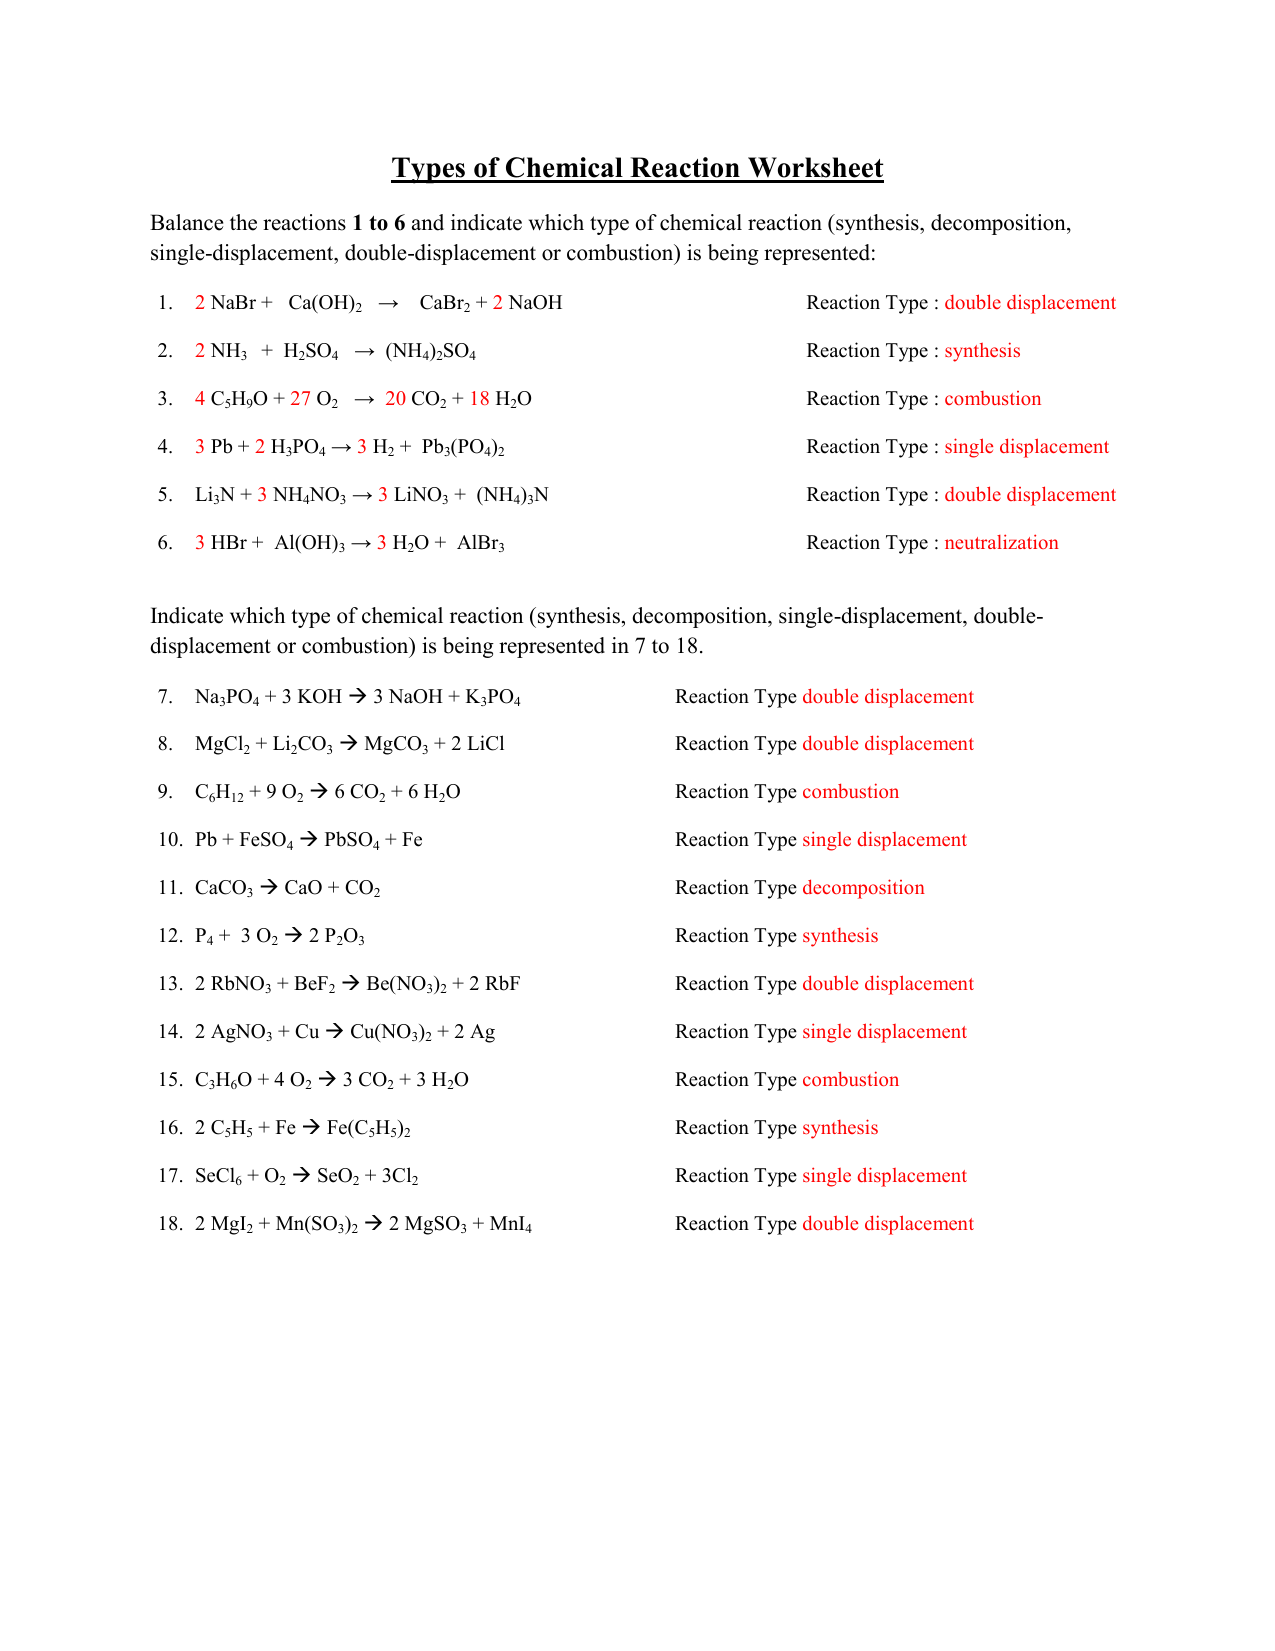 Types of Chemical Reaction Worksheet answers For Classification Of Chemical Reactions Worksheet